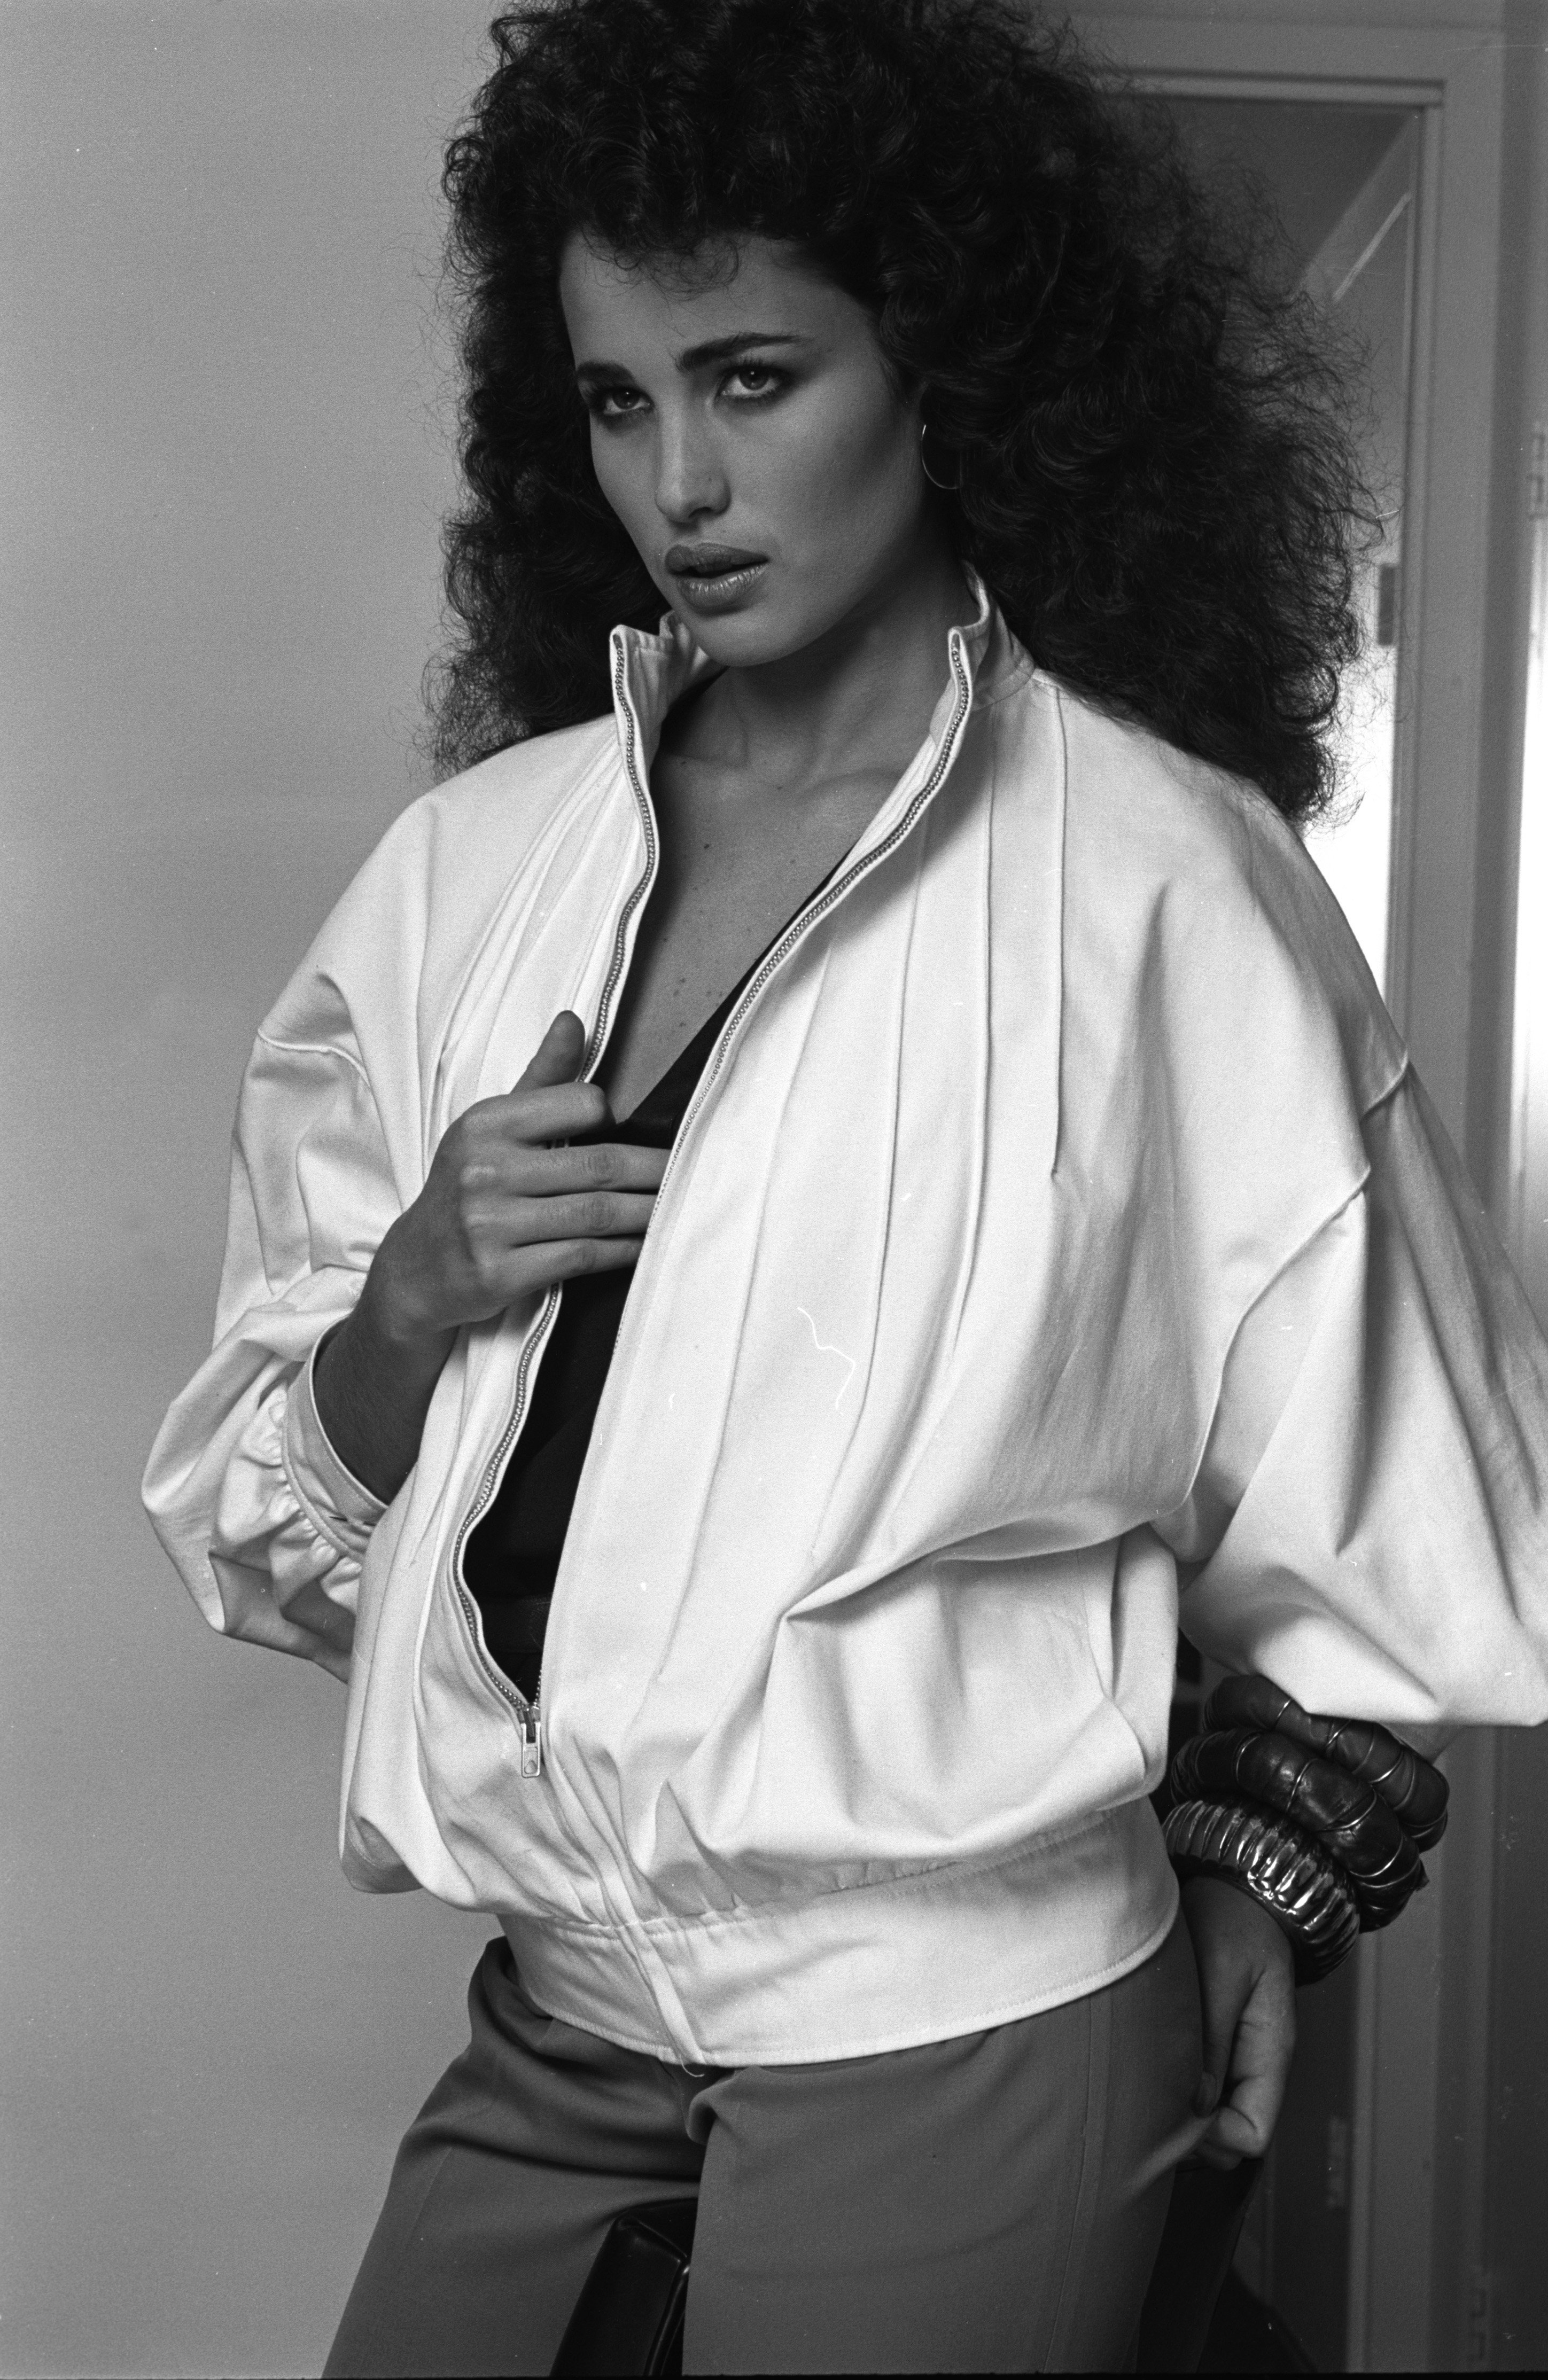 Model Andie MacDowell posing during a photoshoot for US Vogue magazine in the 1980s. | Source: Getty Images